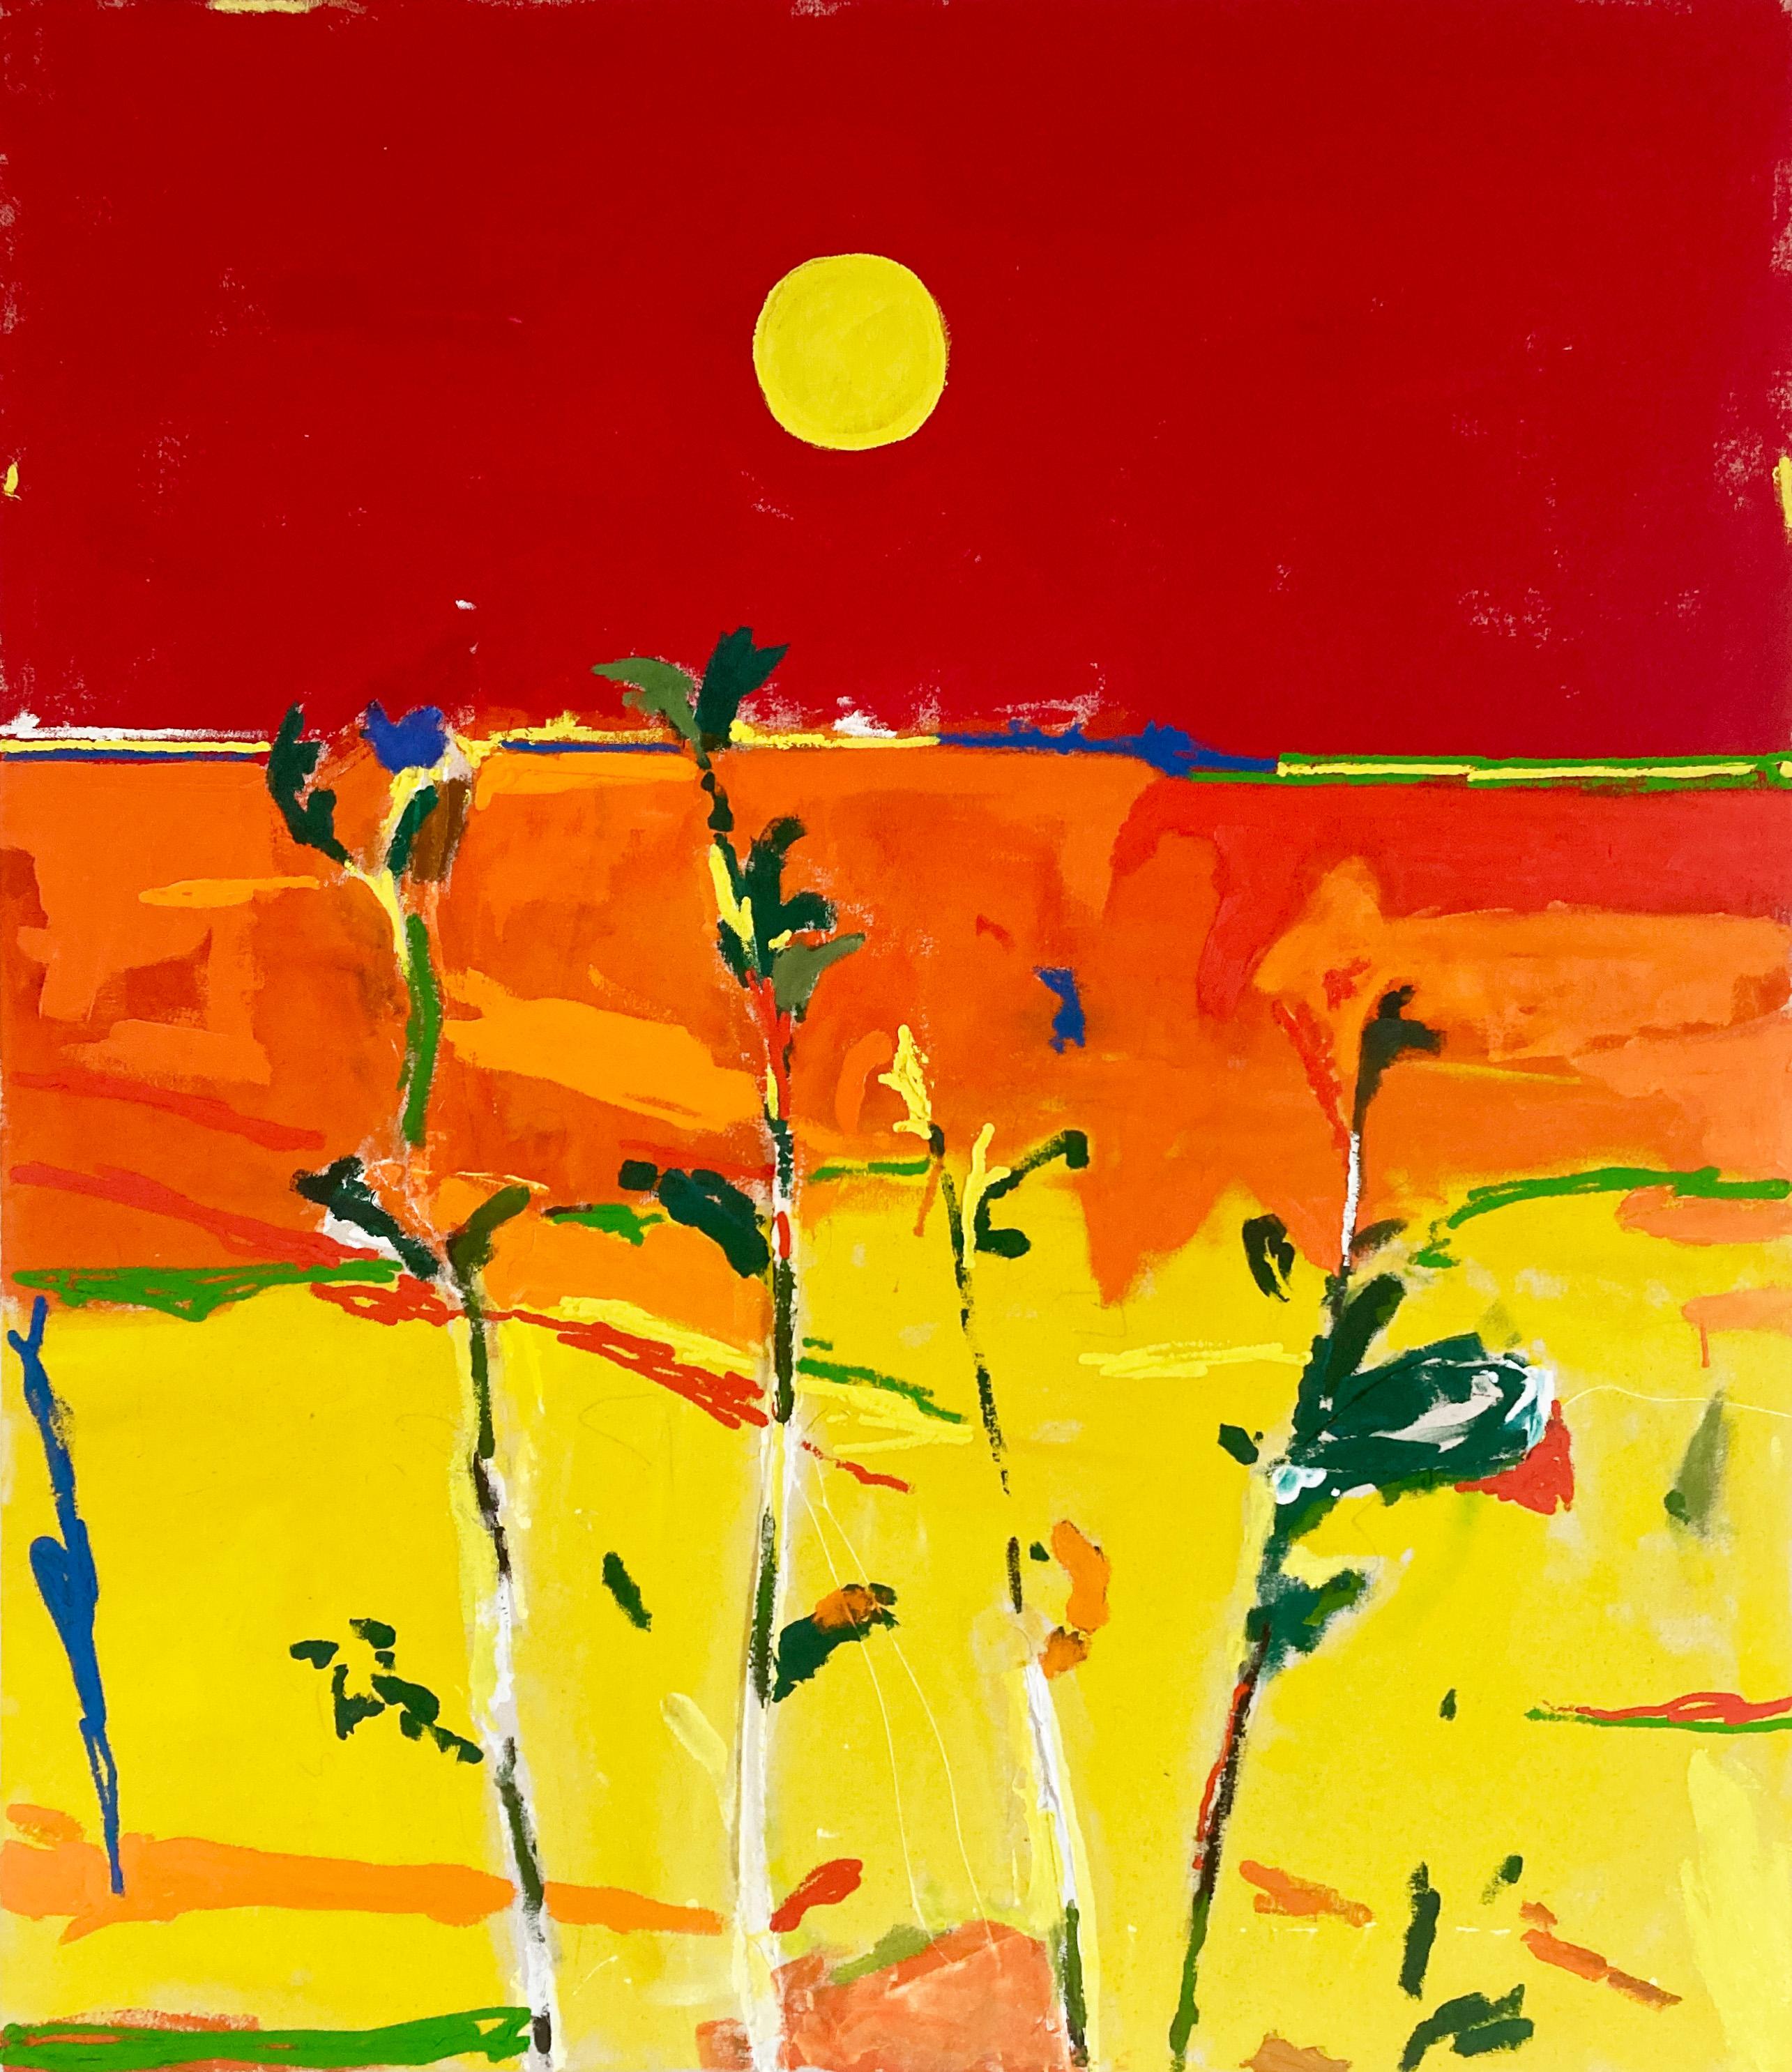 Scorched shows and intensely heated landscape with the sun hovering overhead. Plant life struggles to stay alive in this hot climate and the plants here are shown climbing towards the sun. Exploring themes of environmental change and global warming,